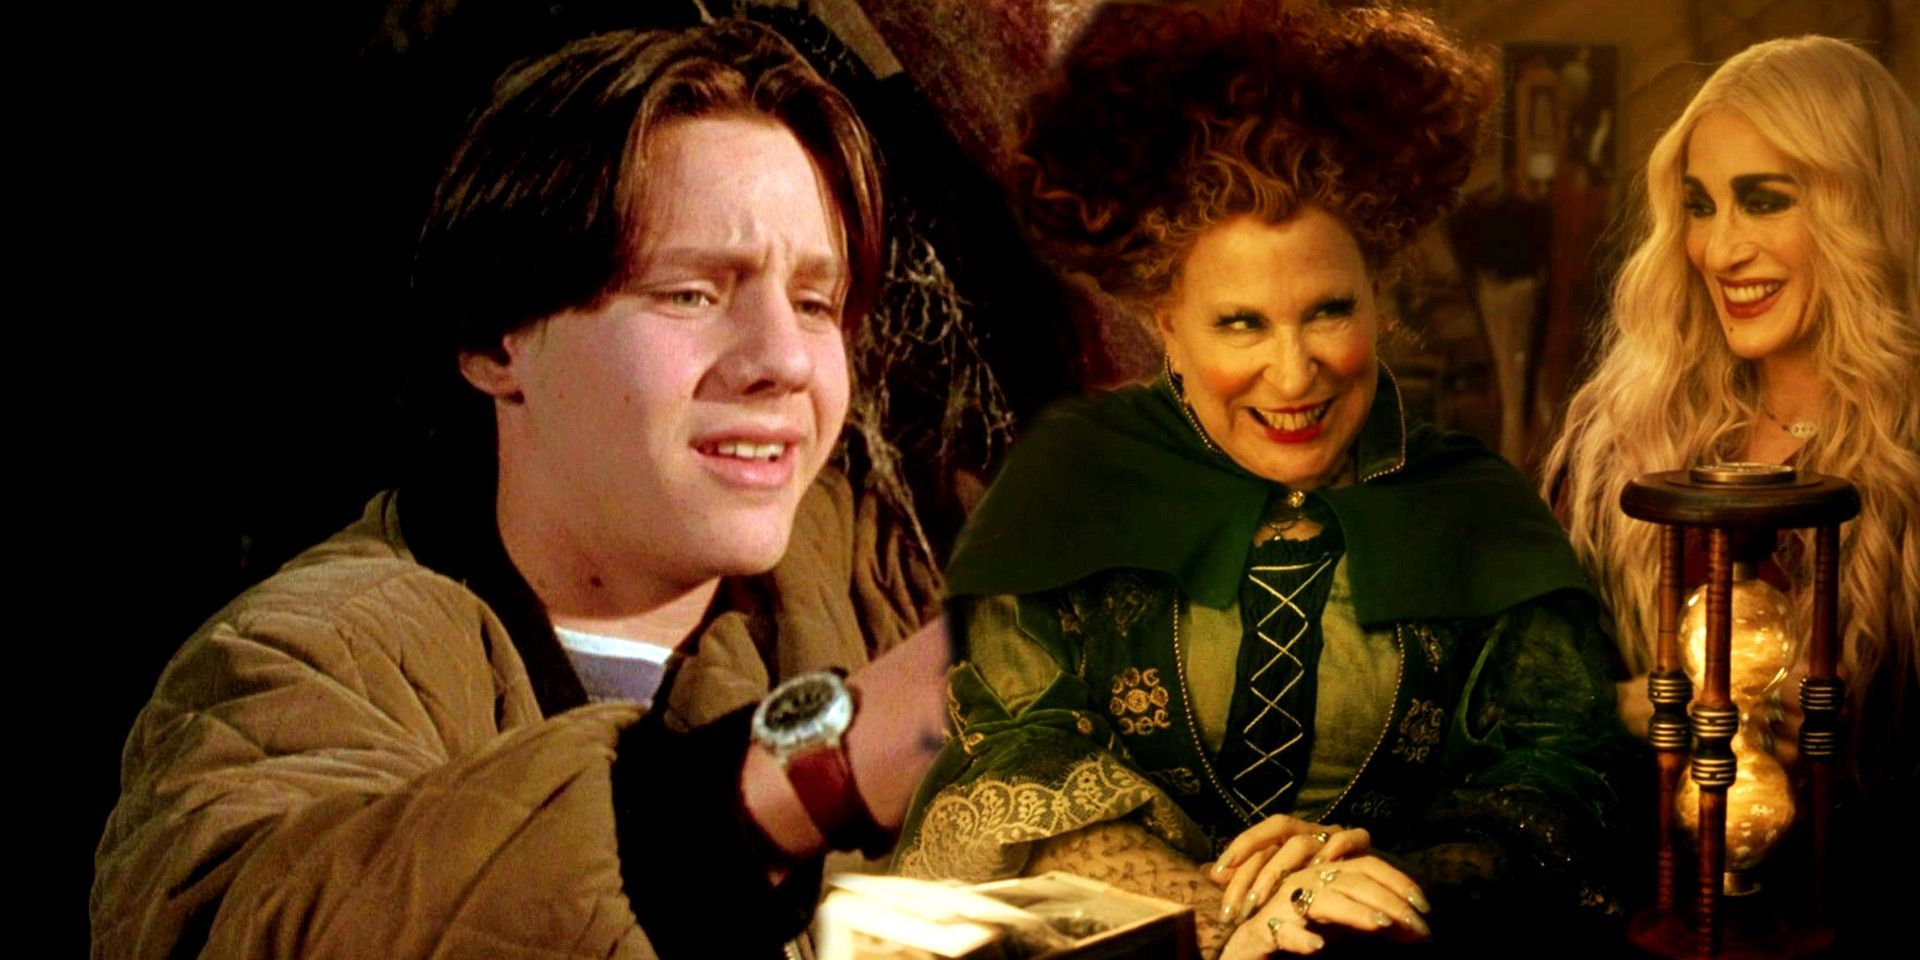 Blended image of Max lighting up the Black Candle in Hocus Pocus and the Sanderson sisters smiling in Hocus Pocus 2